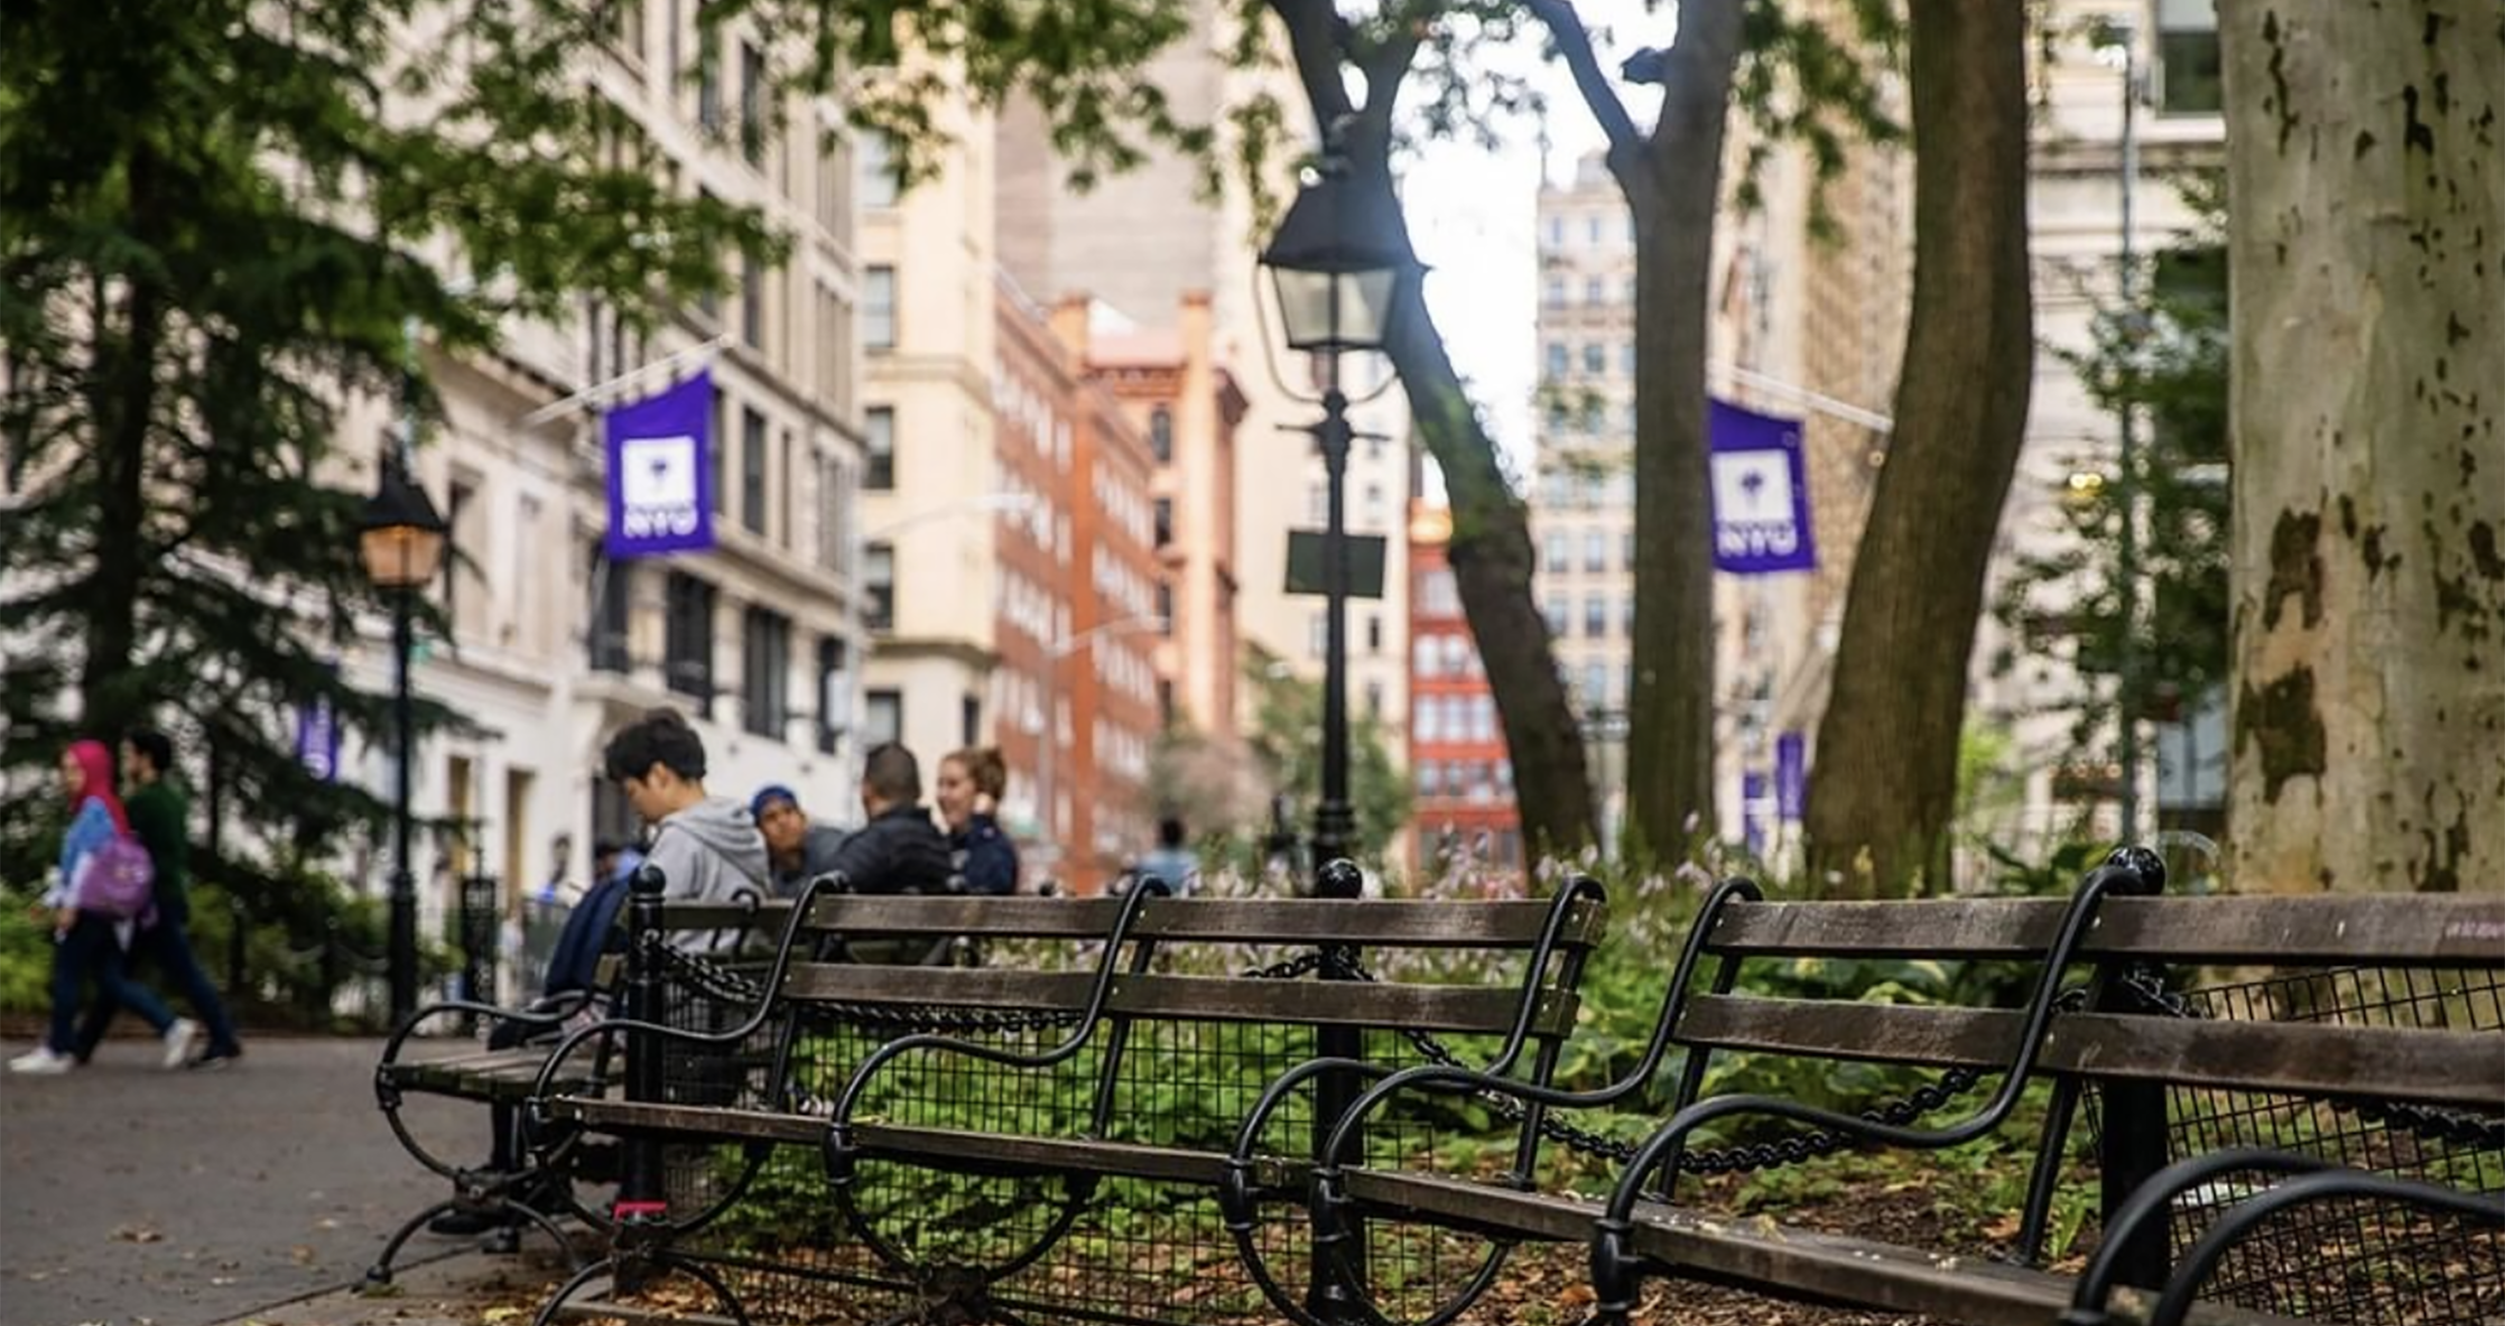 Park benches in Washington Square Park with NYU flags in the background